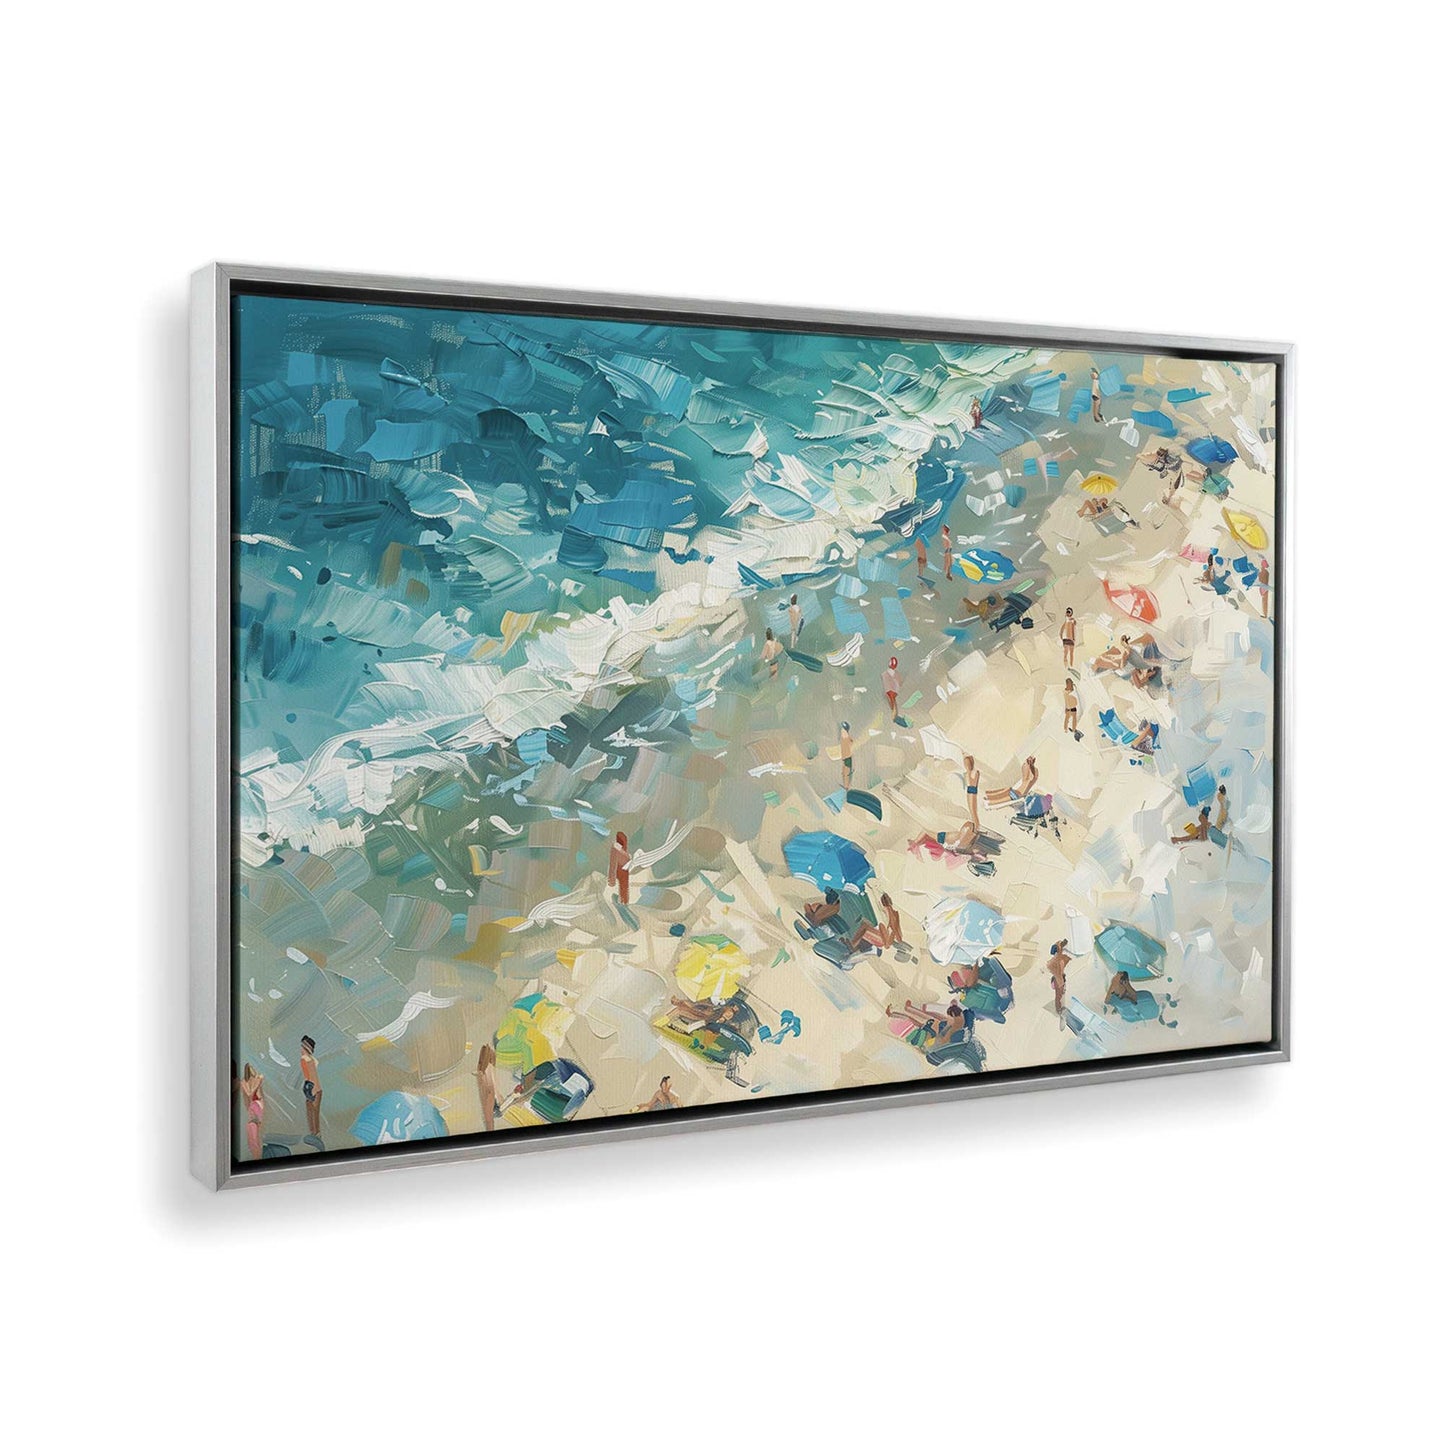 [Color:Polished Chrome],[shape:rectangle] Picture of art in a Polished Chrome frame at an angle